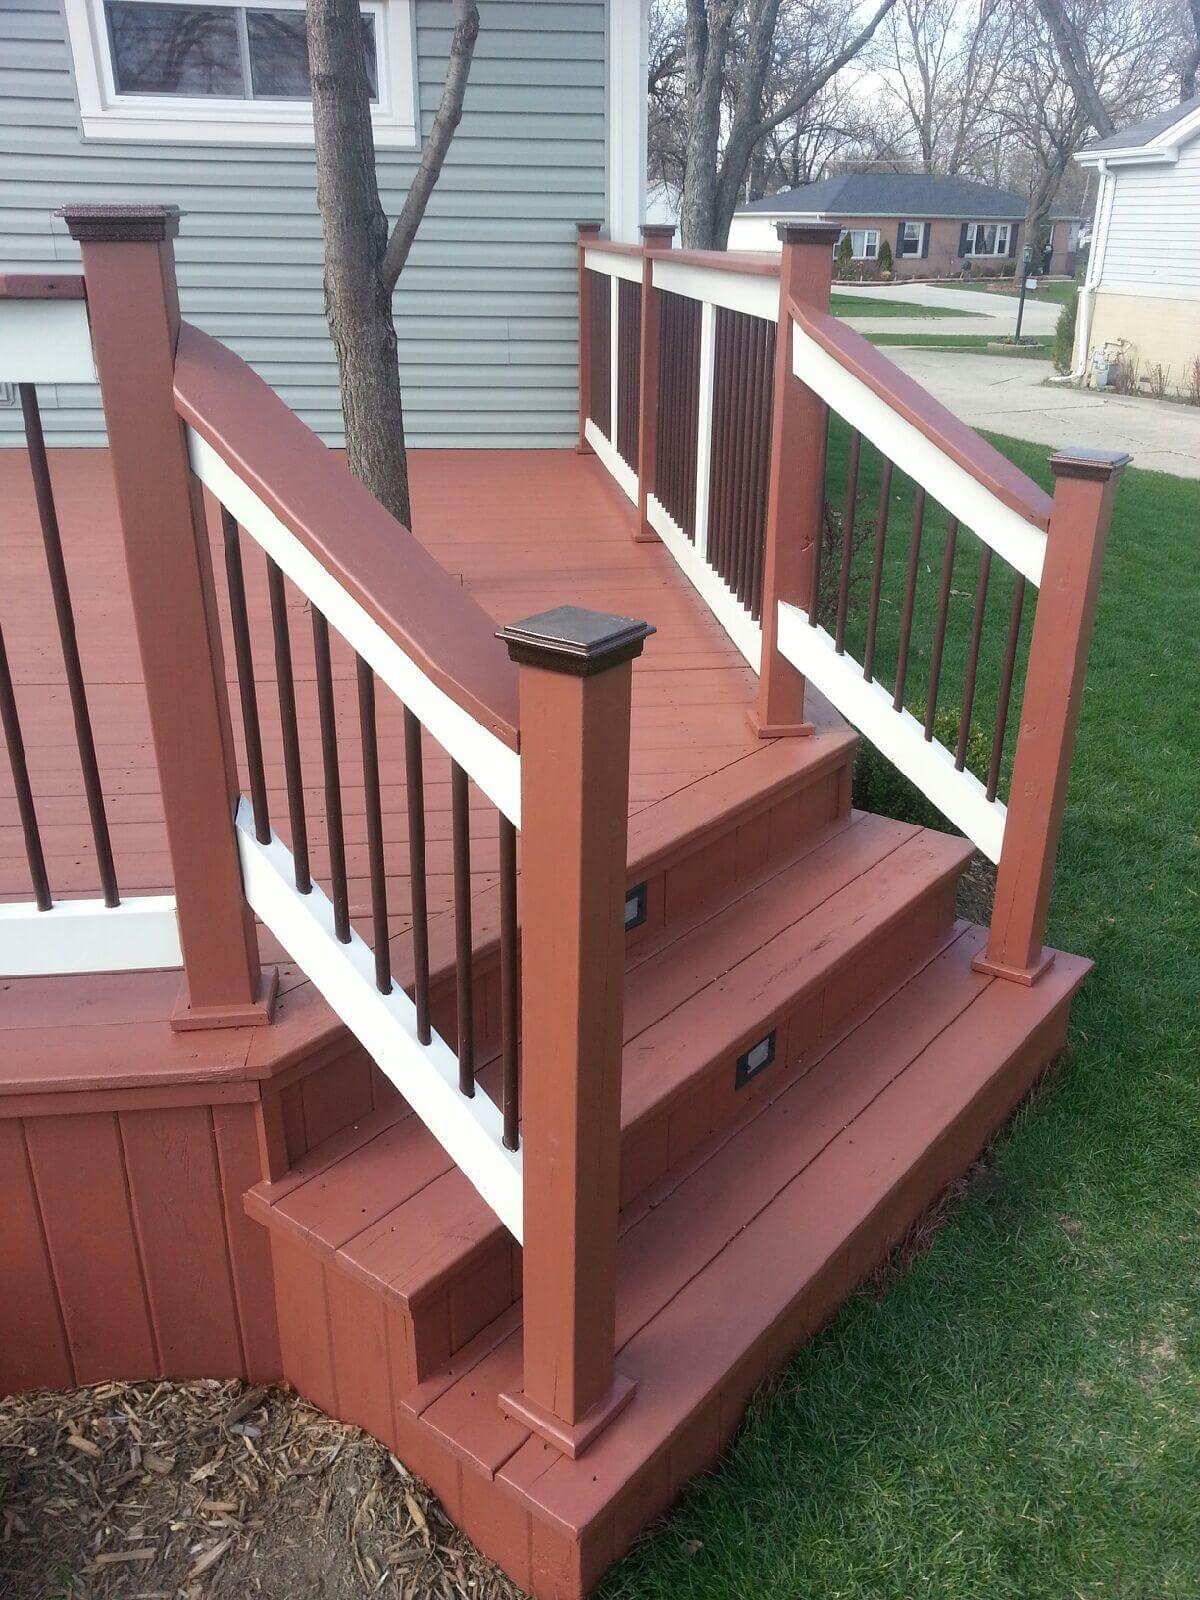 Repairs and maintenance for your deck, fence, and exterior wood staining. - Deck Staining Hinsdale - Deck Cleaning Services